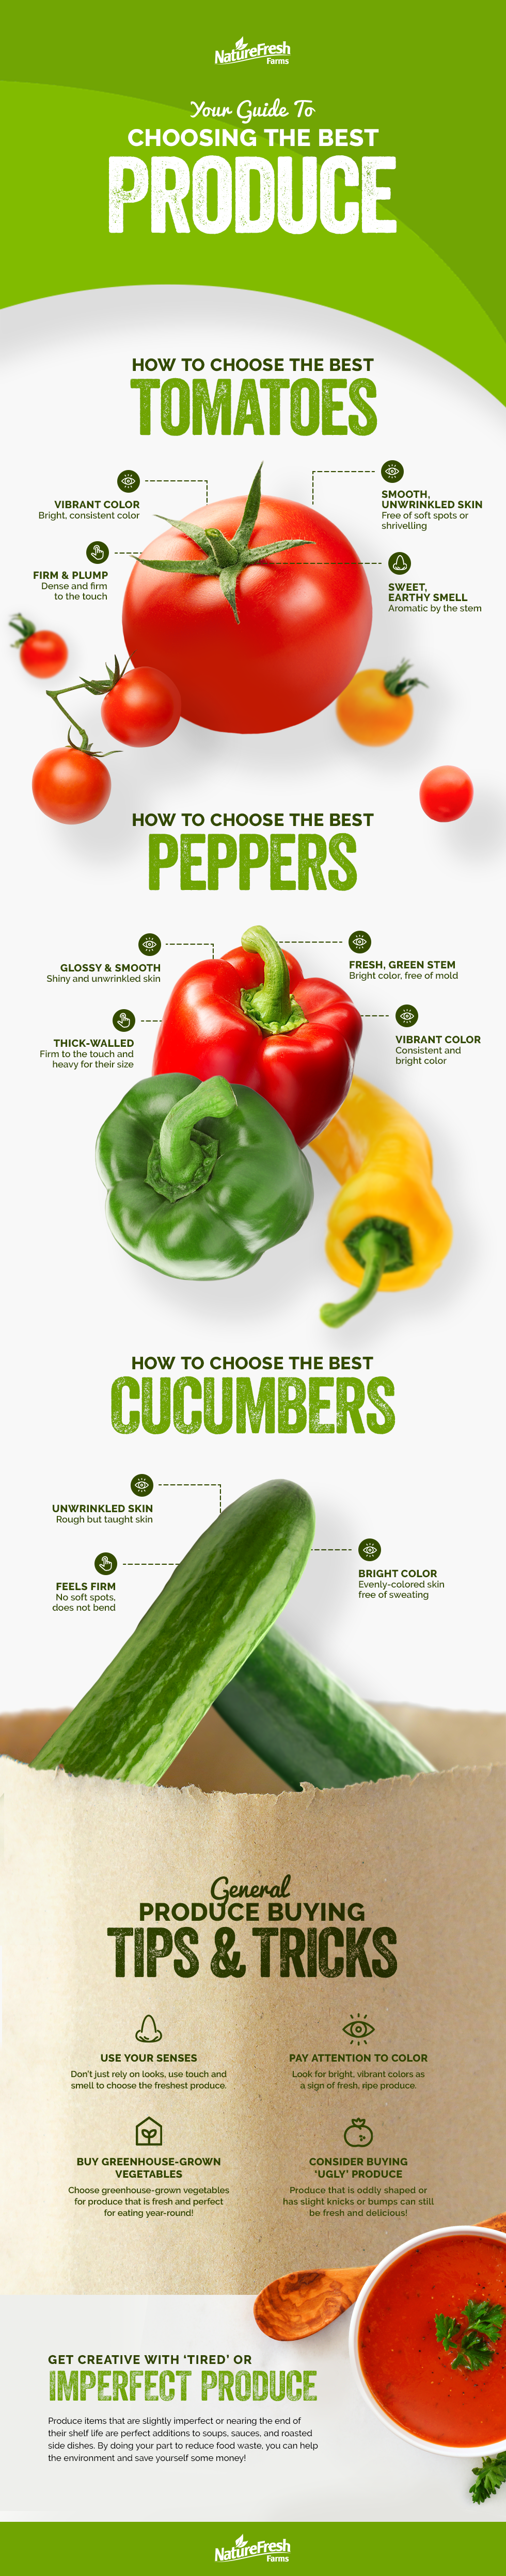 Produce Buying Guide